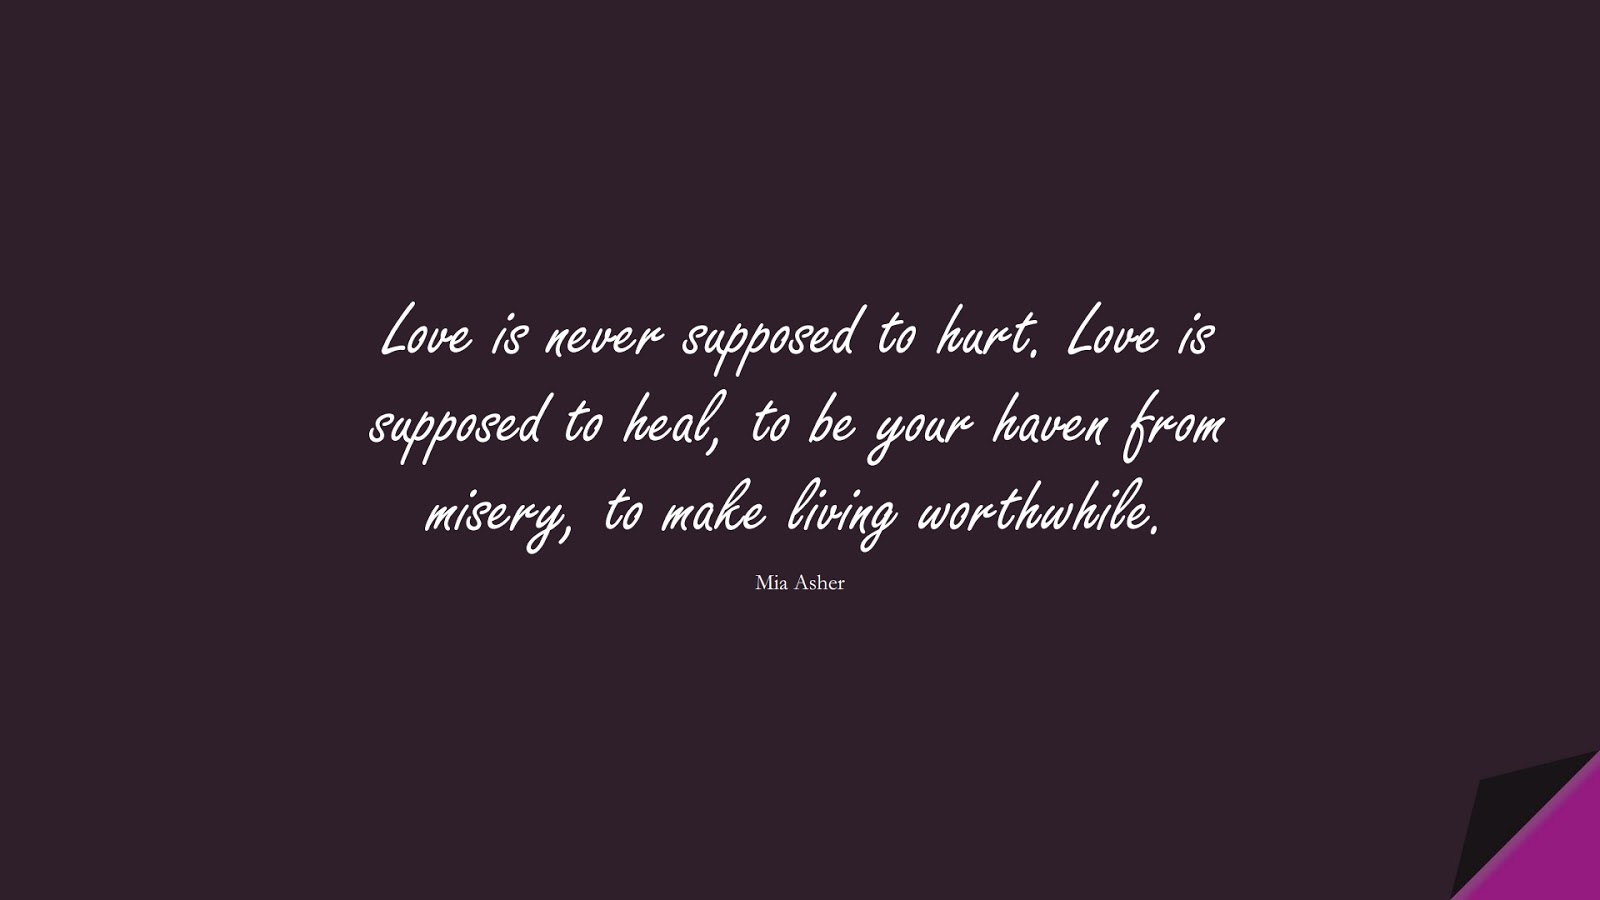 Love is never supposed to hurt. Love is supposed to heal, to be your haven from misery, to make living worthwhile. (Mia Asher);  #SadLoveQuotes